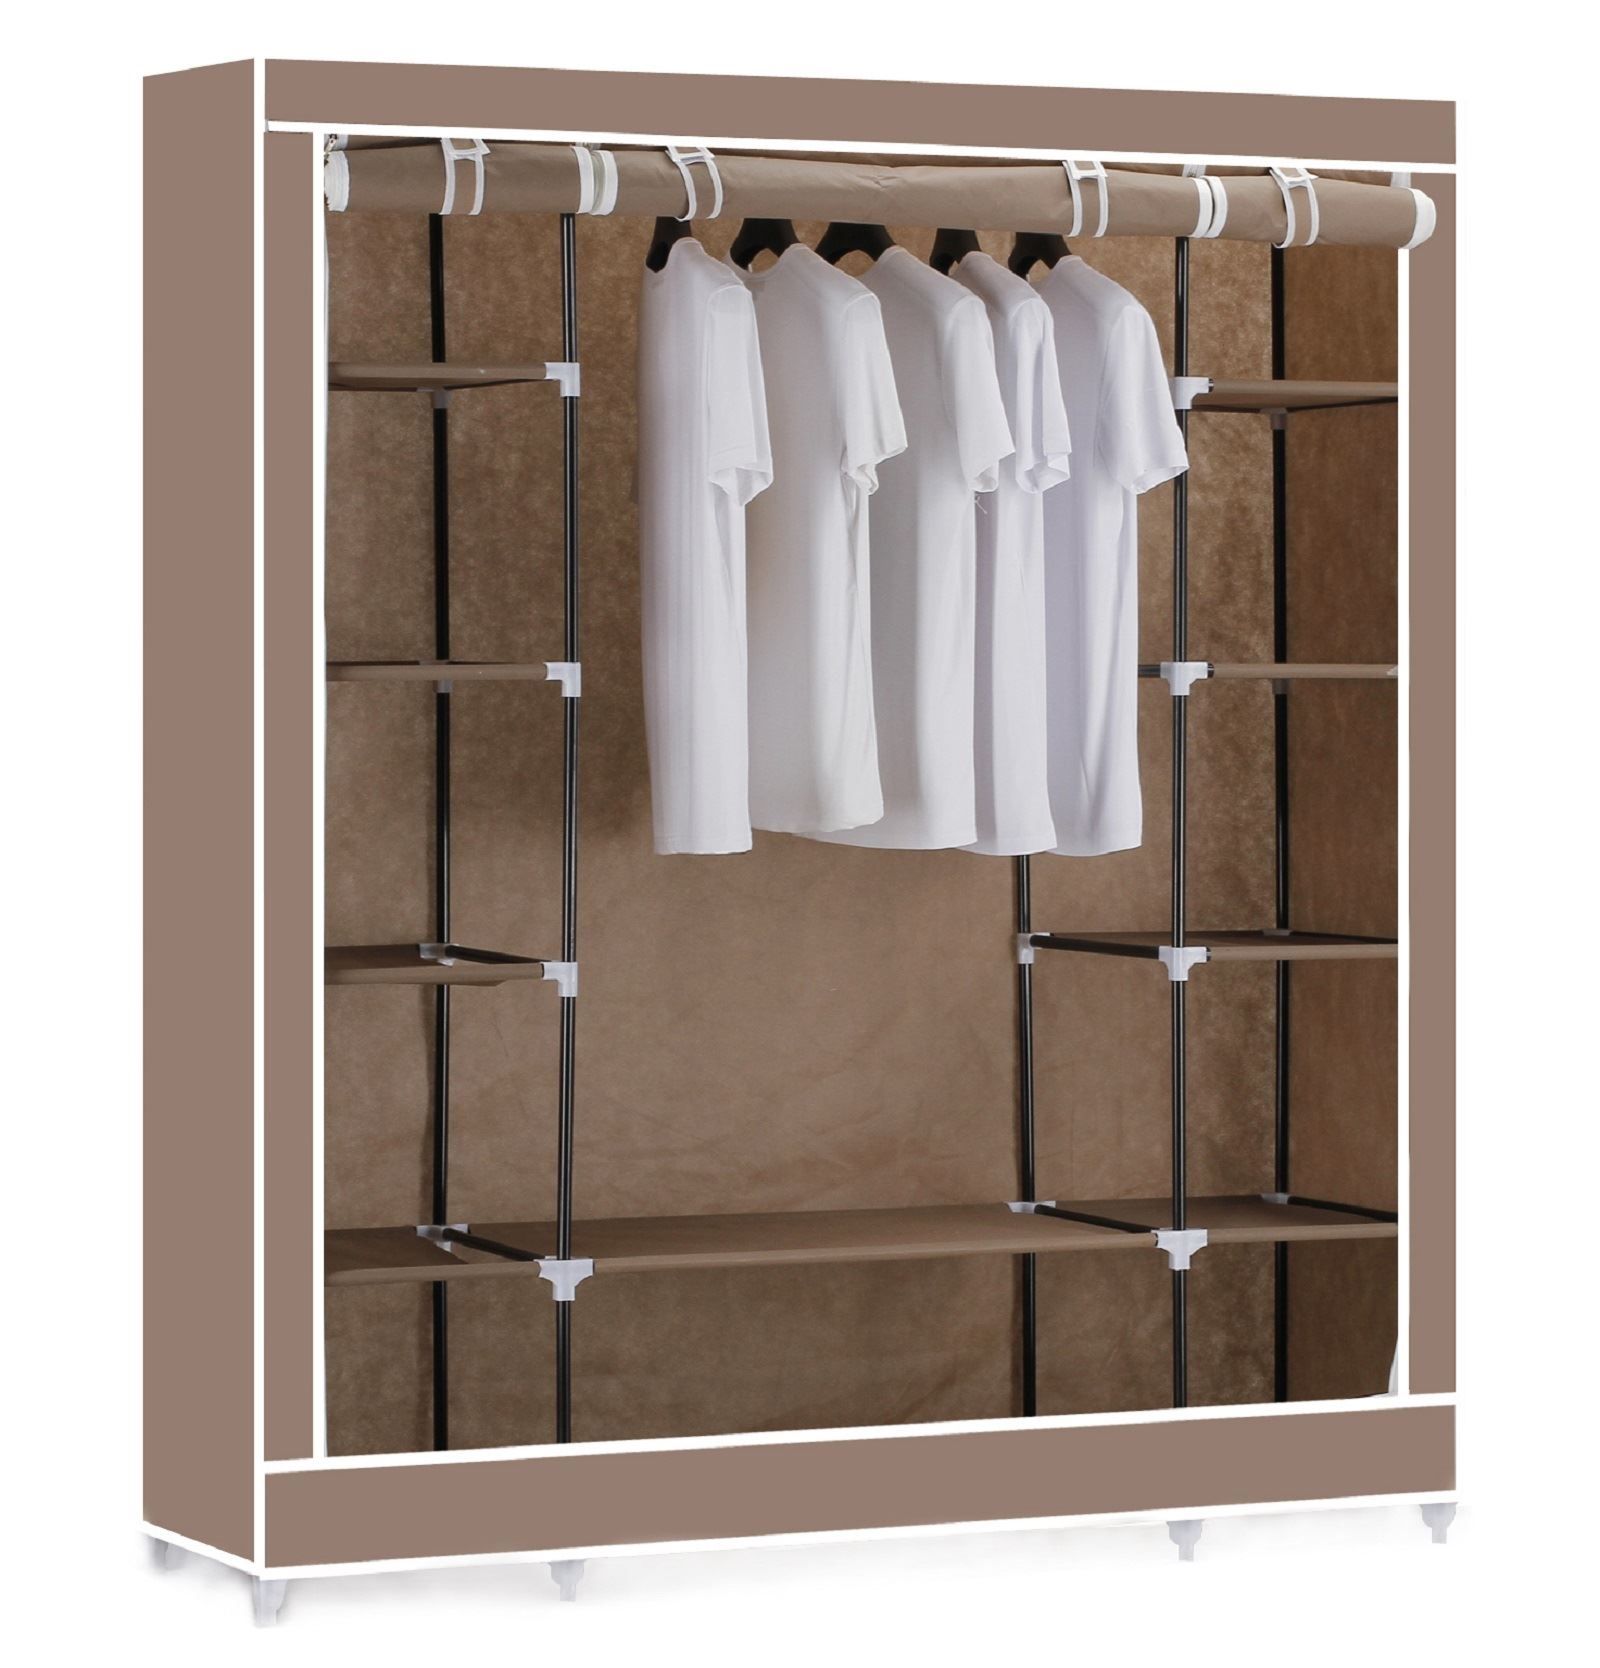 Vinsani Triple Canvas Clothes Wardrobe Hanging Rail With Storage Pertaining To Hanging Wardrobe Shelves (View 4 of 25)